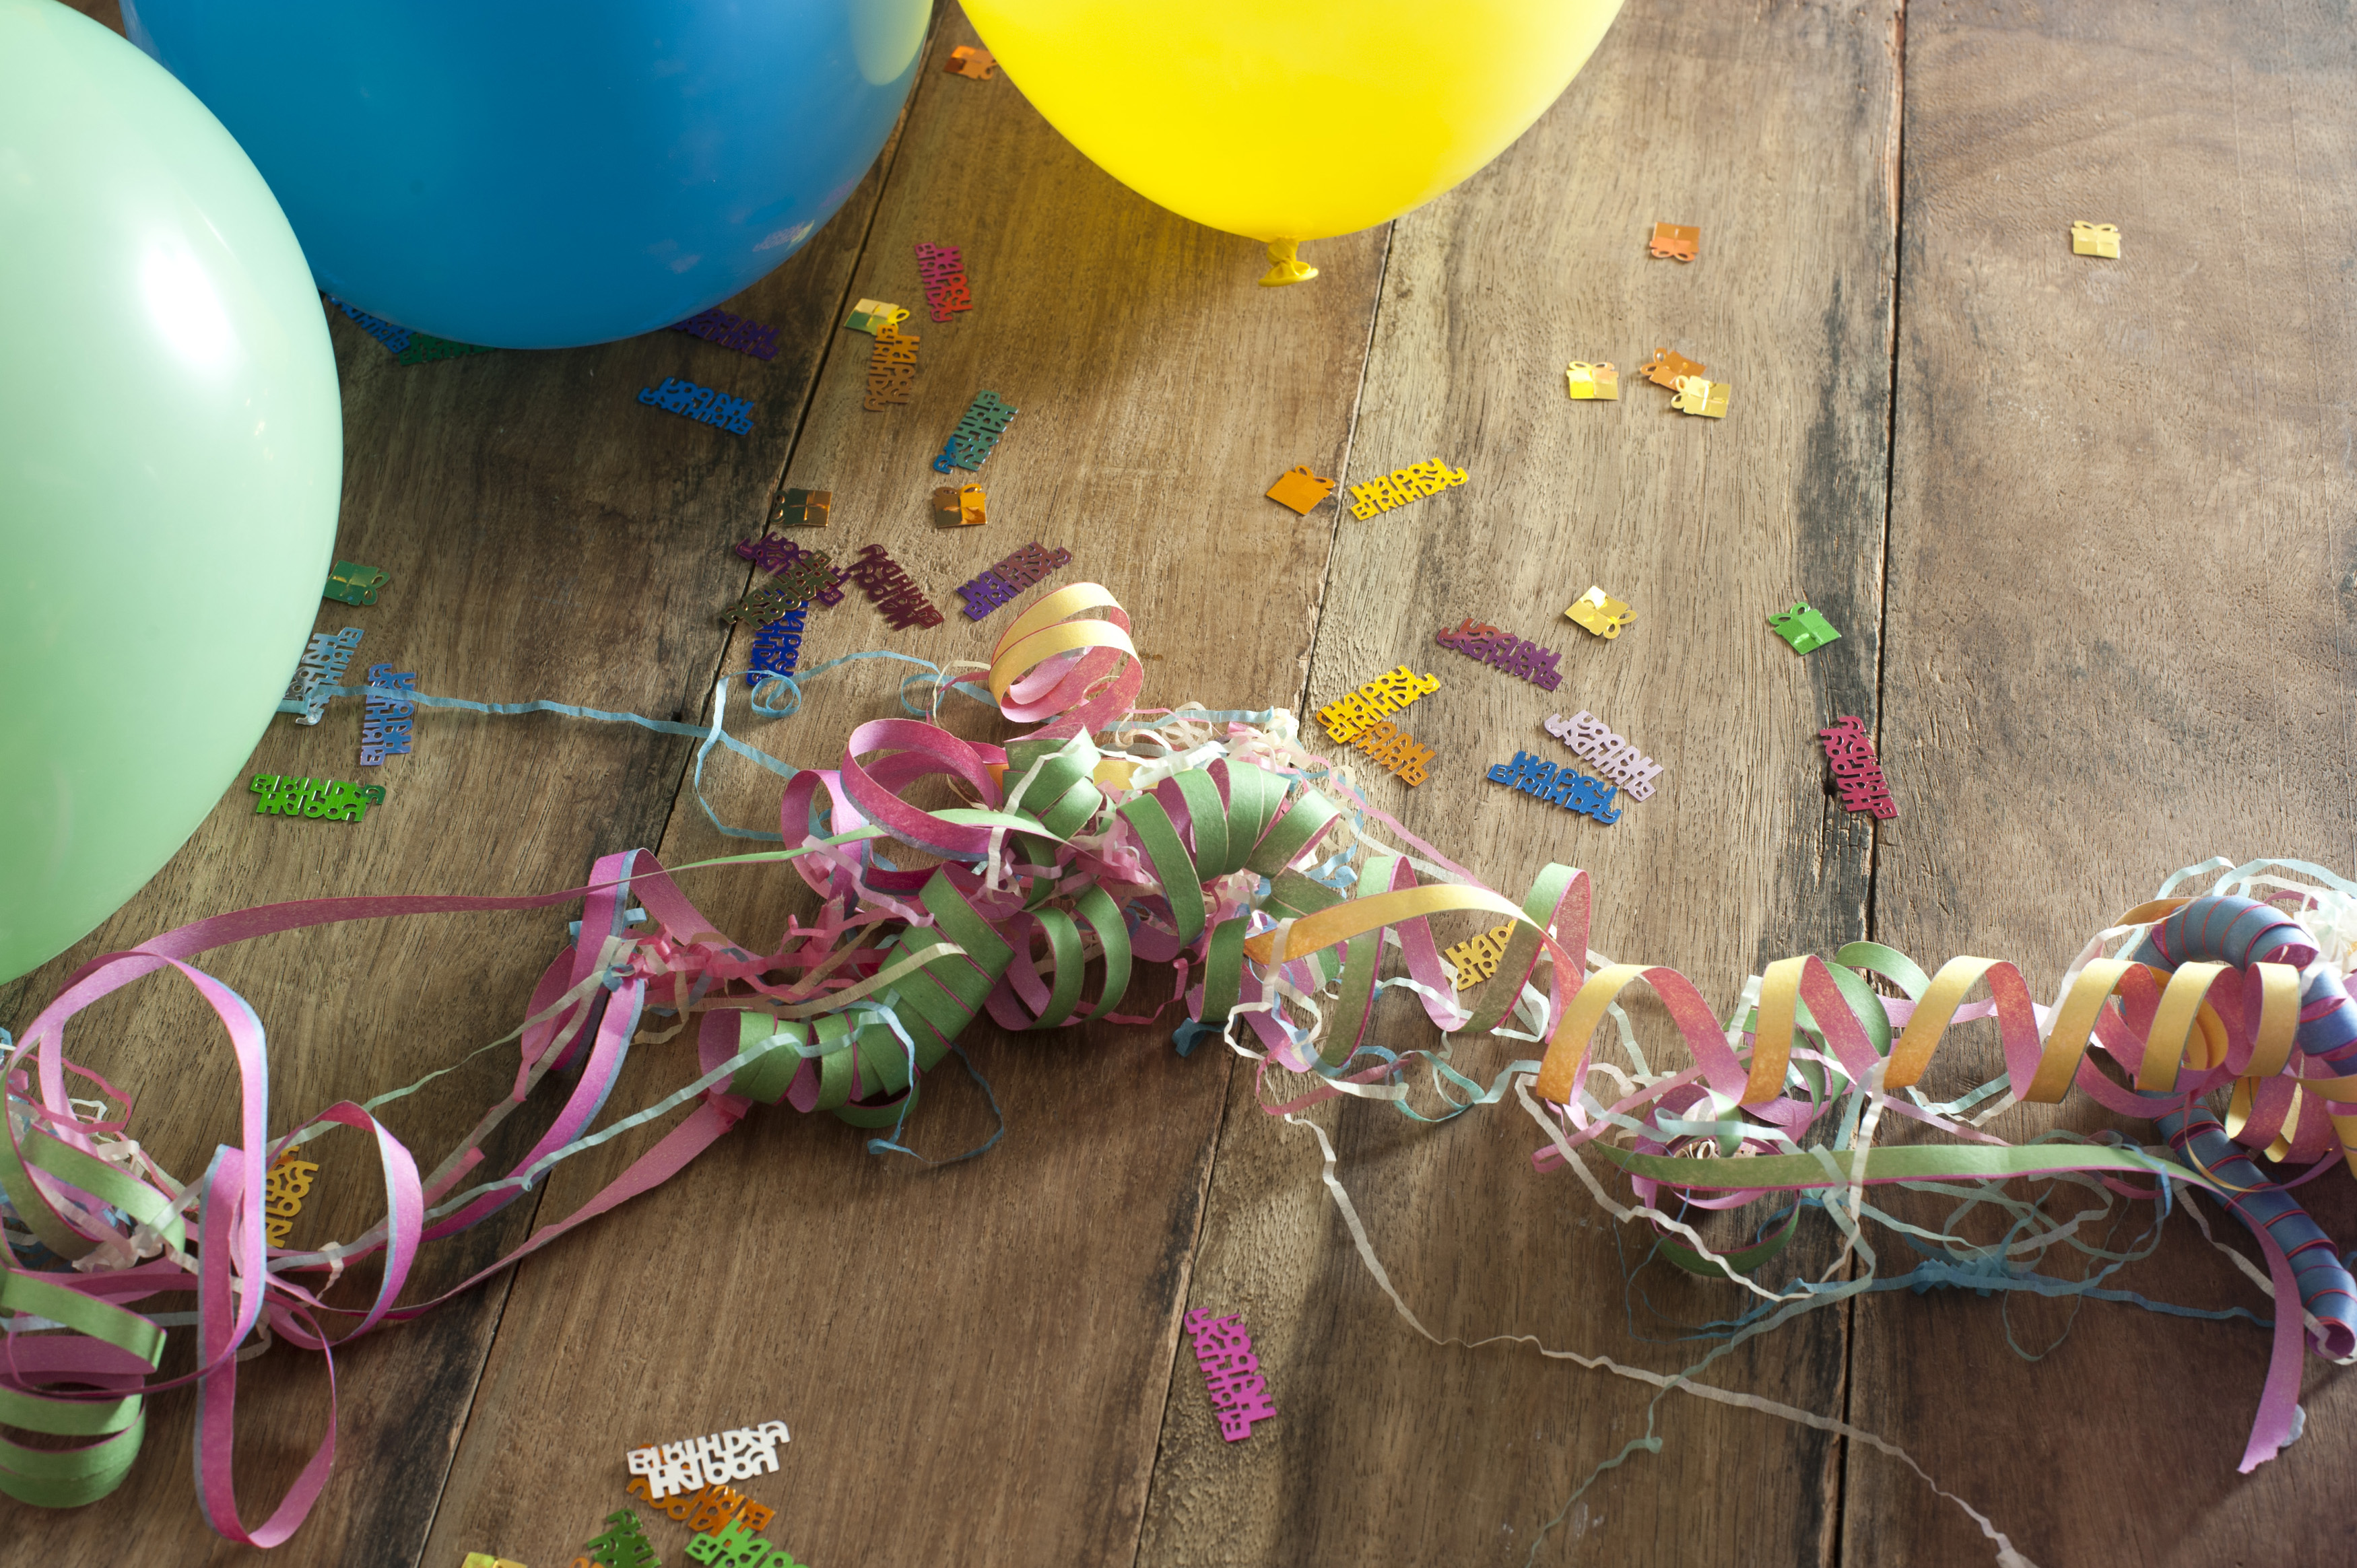 Free Stock Photo 11469 Birthday Party Decorations on Wooden Table |  freeimageslive